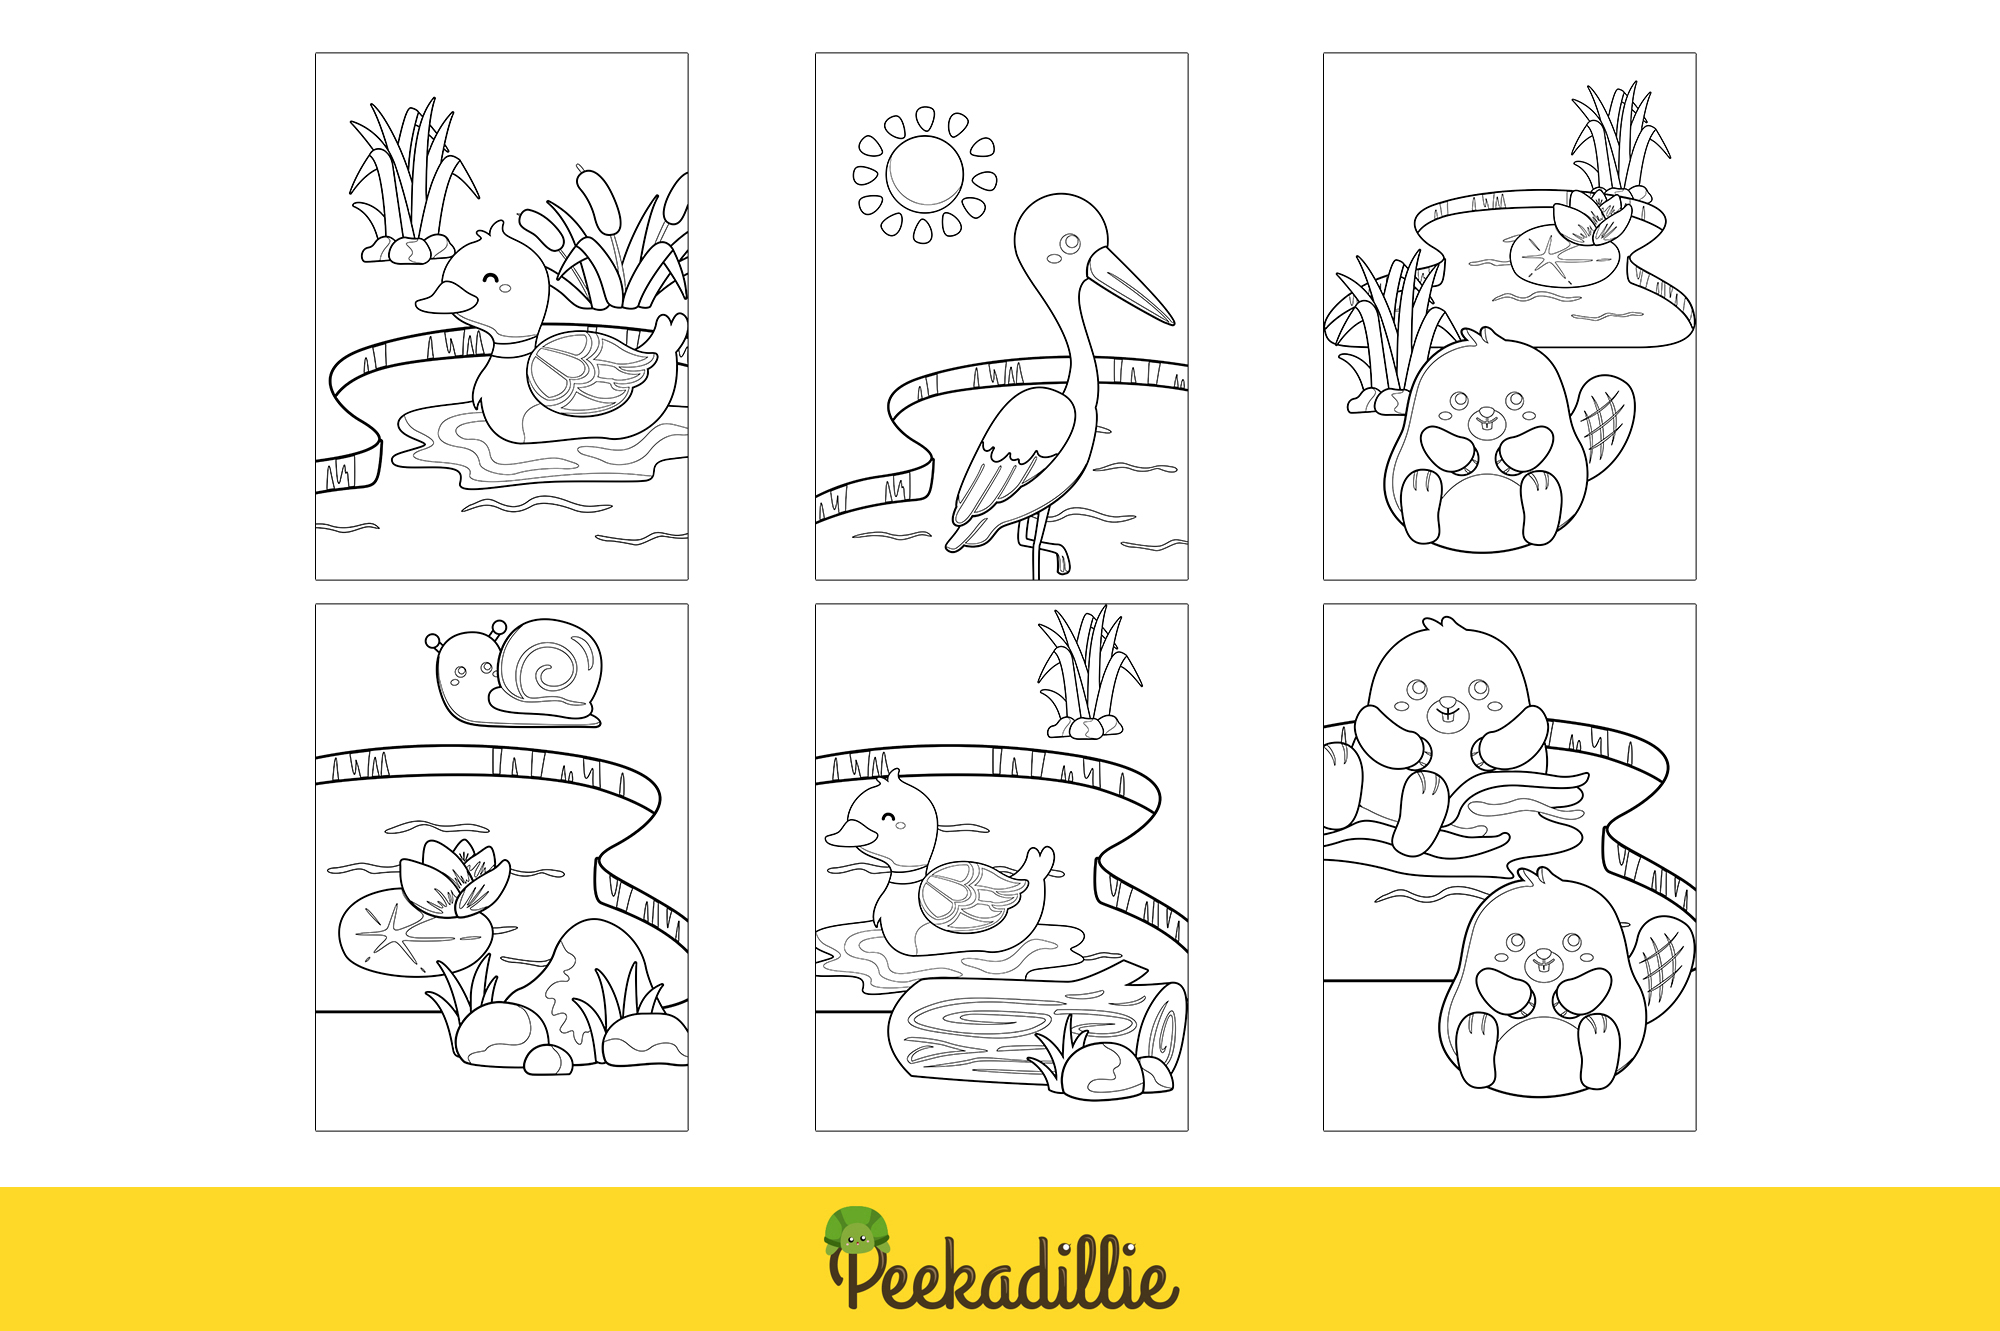 Four coloring pages of different animals and plants.